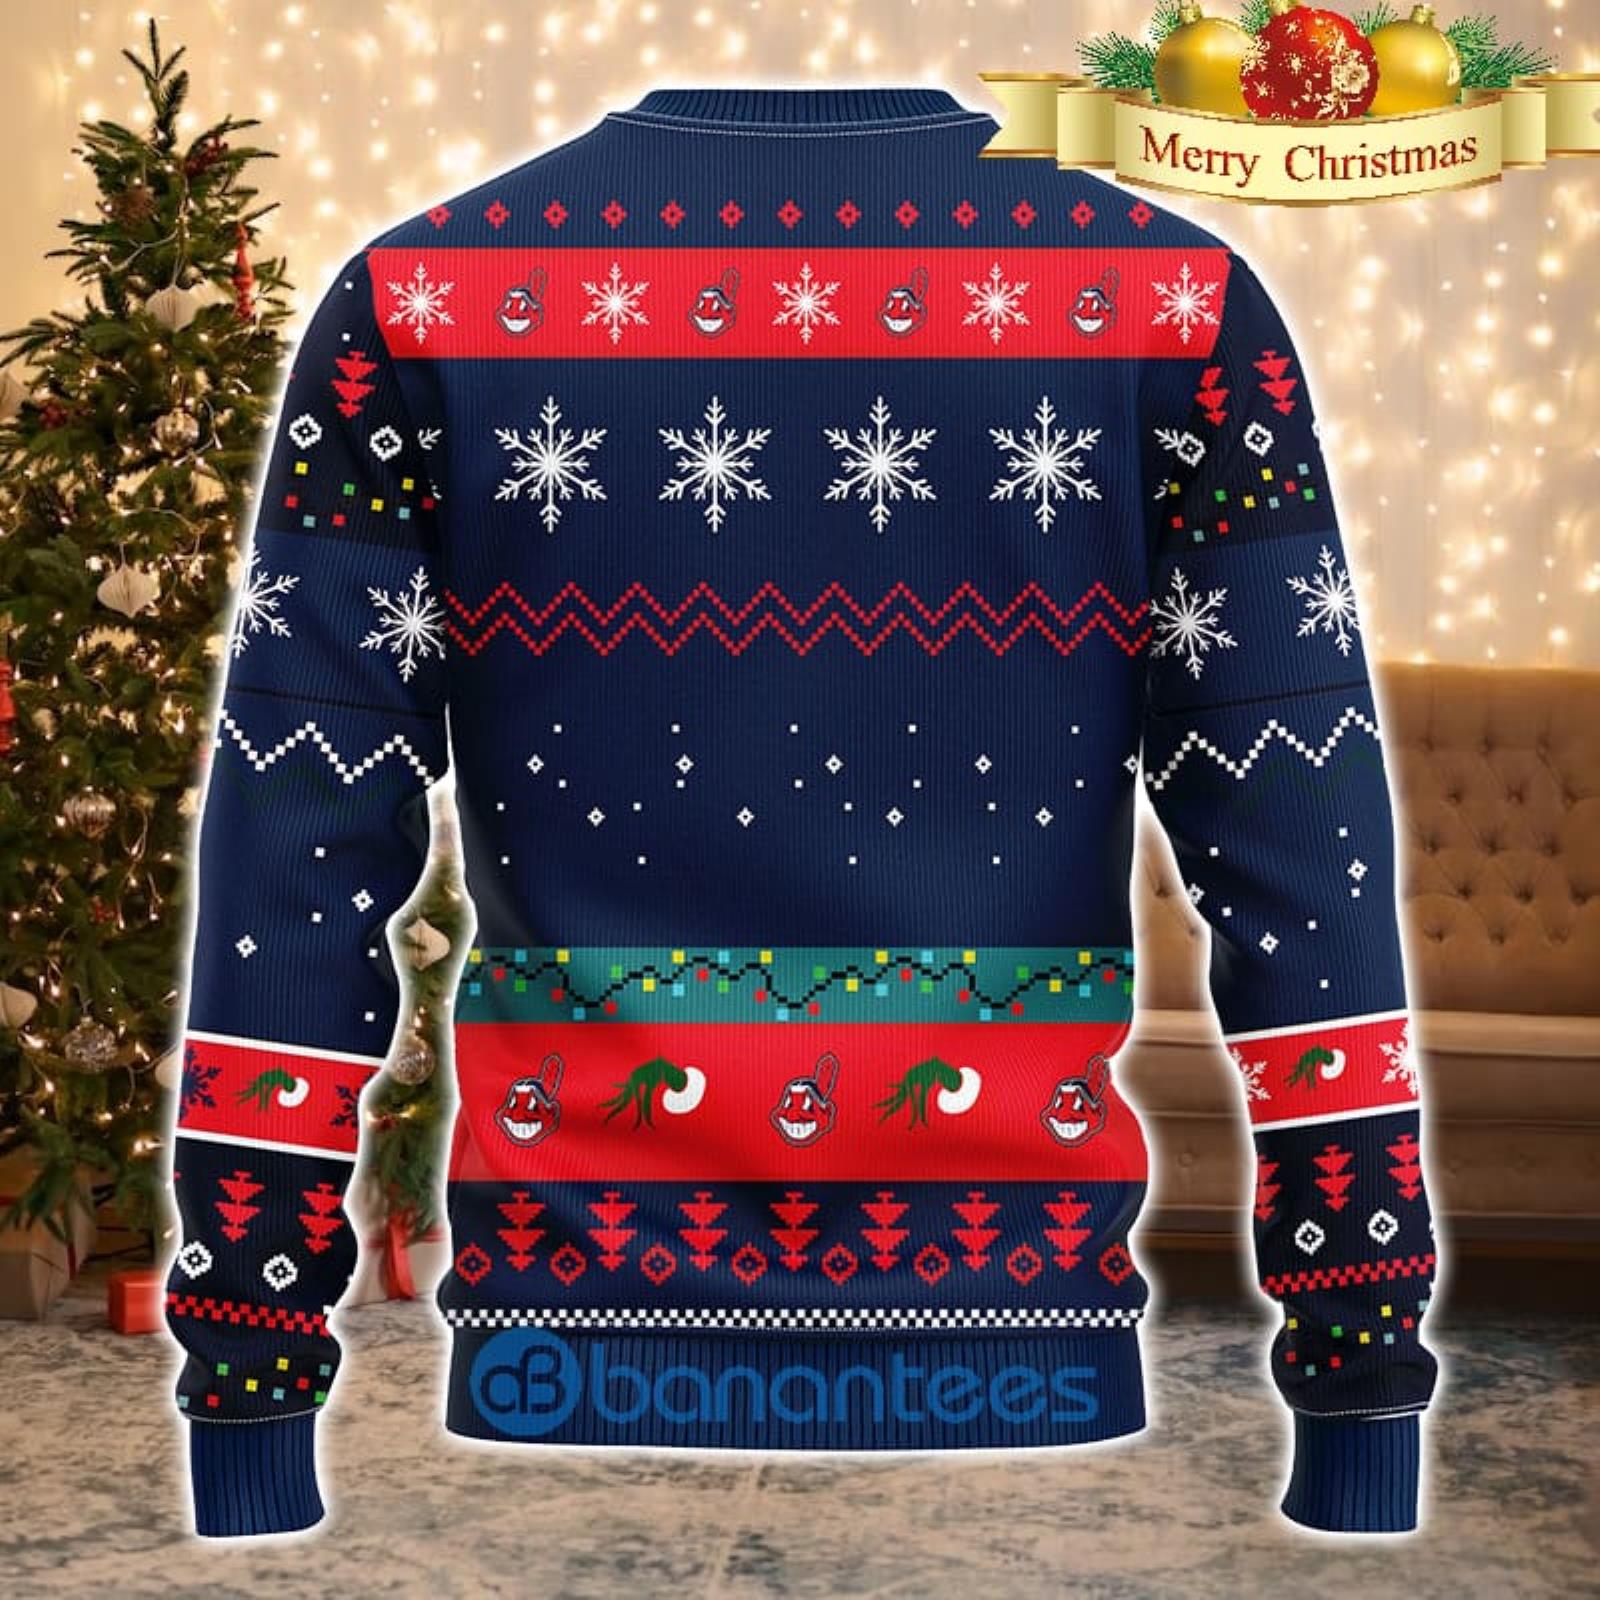 MLB Cleveland Indians Grinch Ugly Christmas Sweater - The Clothes